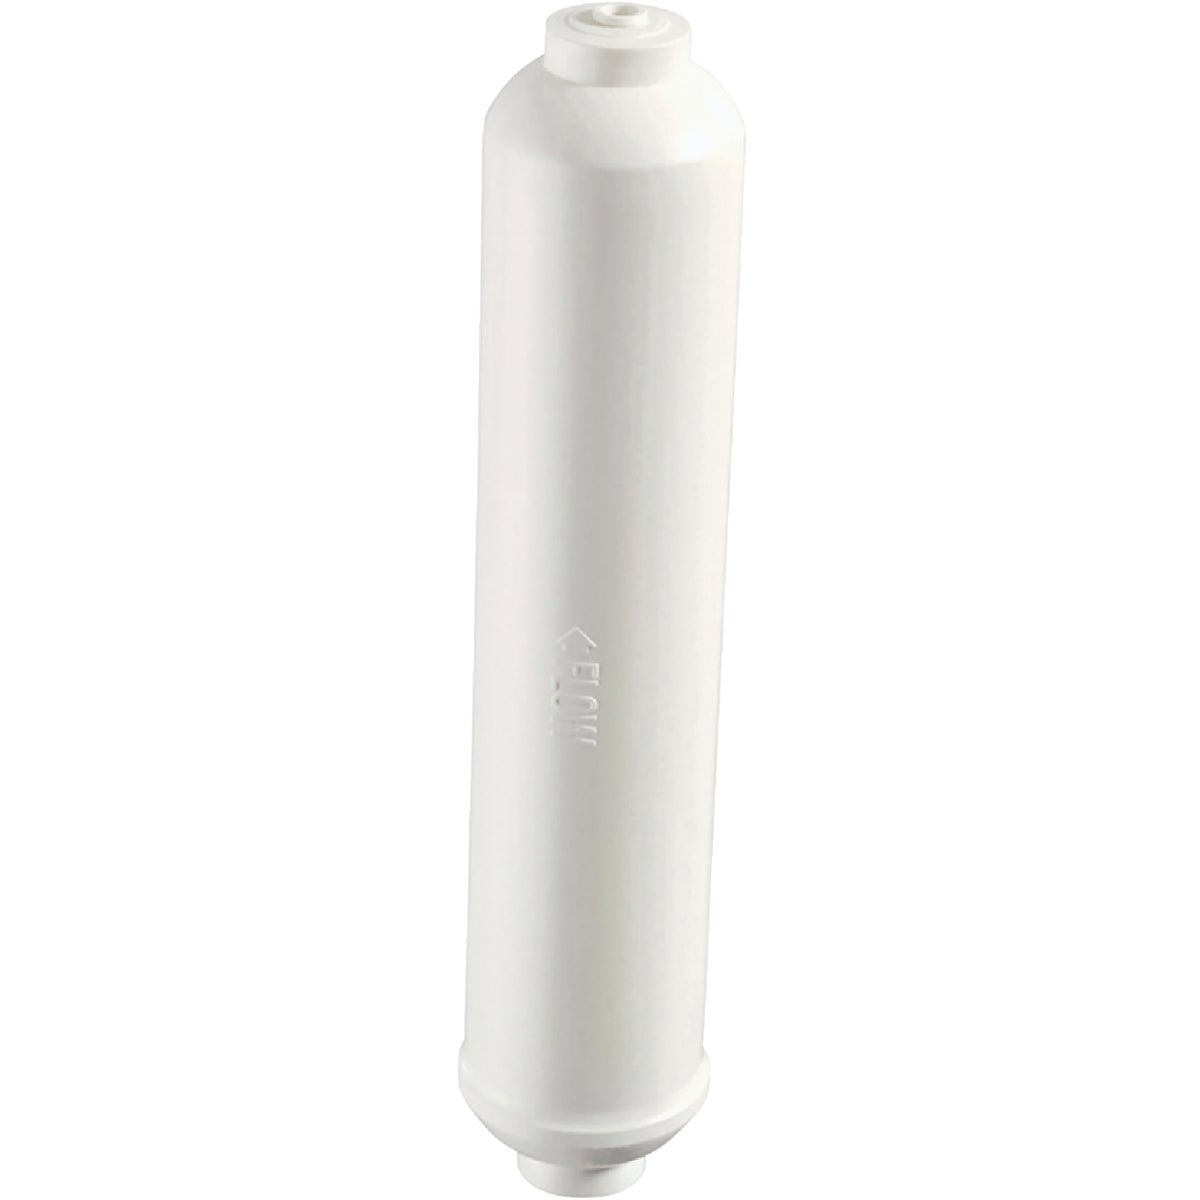 Culligan IC-100A Icemaker / Refrigerator Water Filter